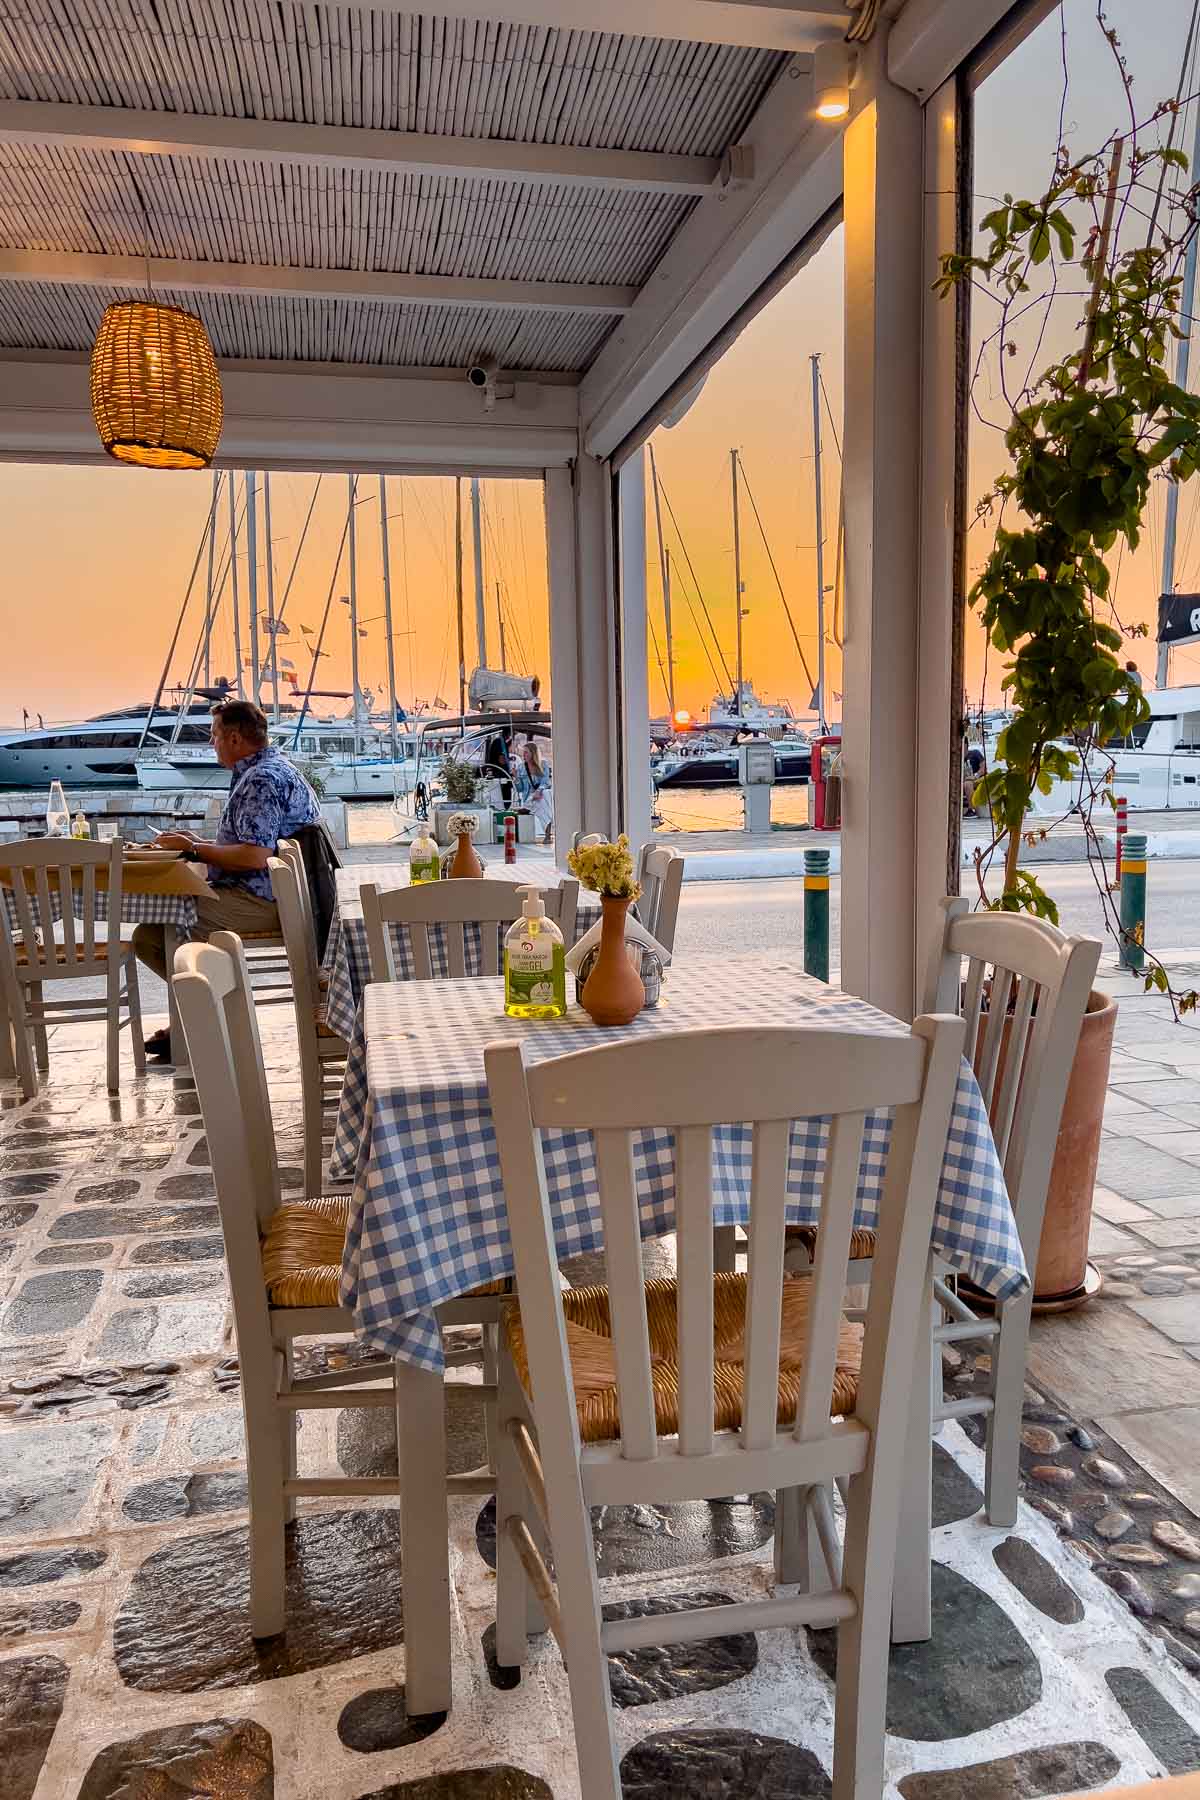 Sunset at Taverna Authentic Greek Cuisine in Naxos